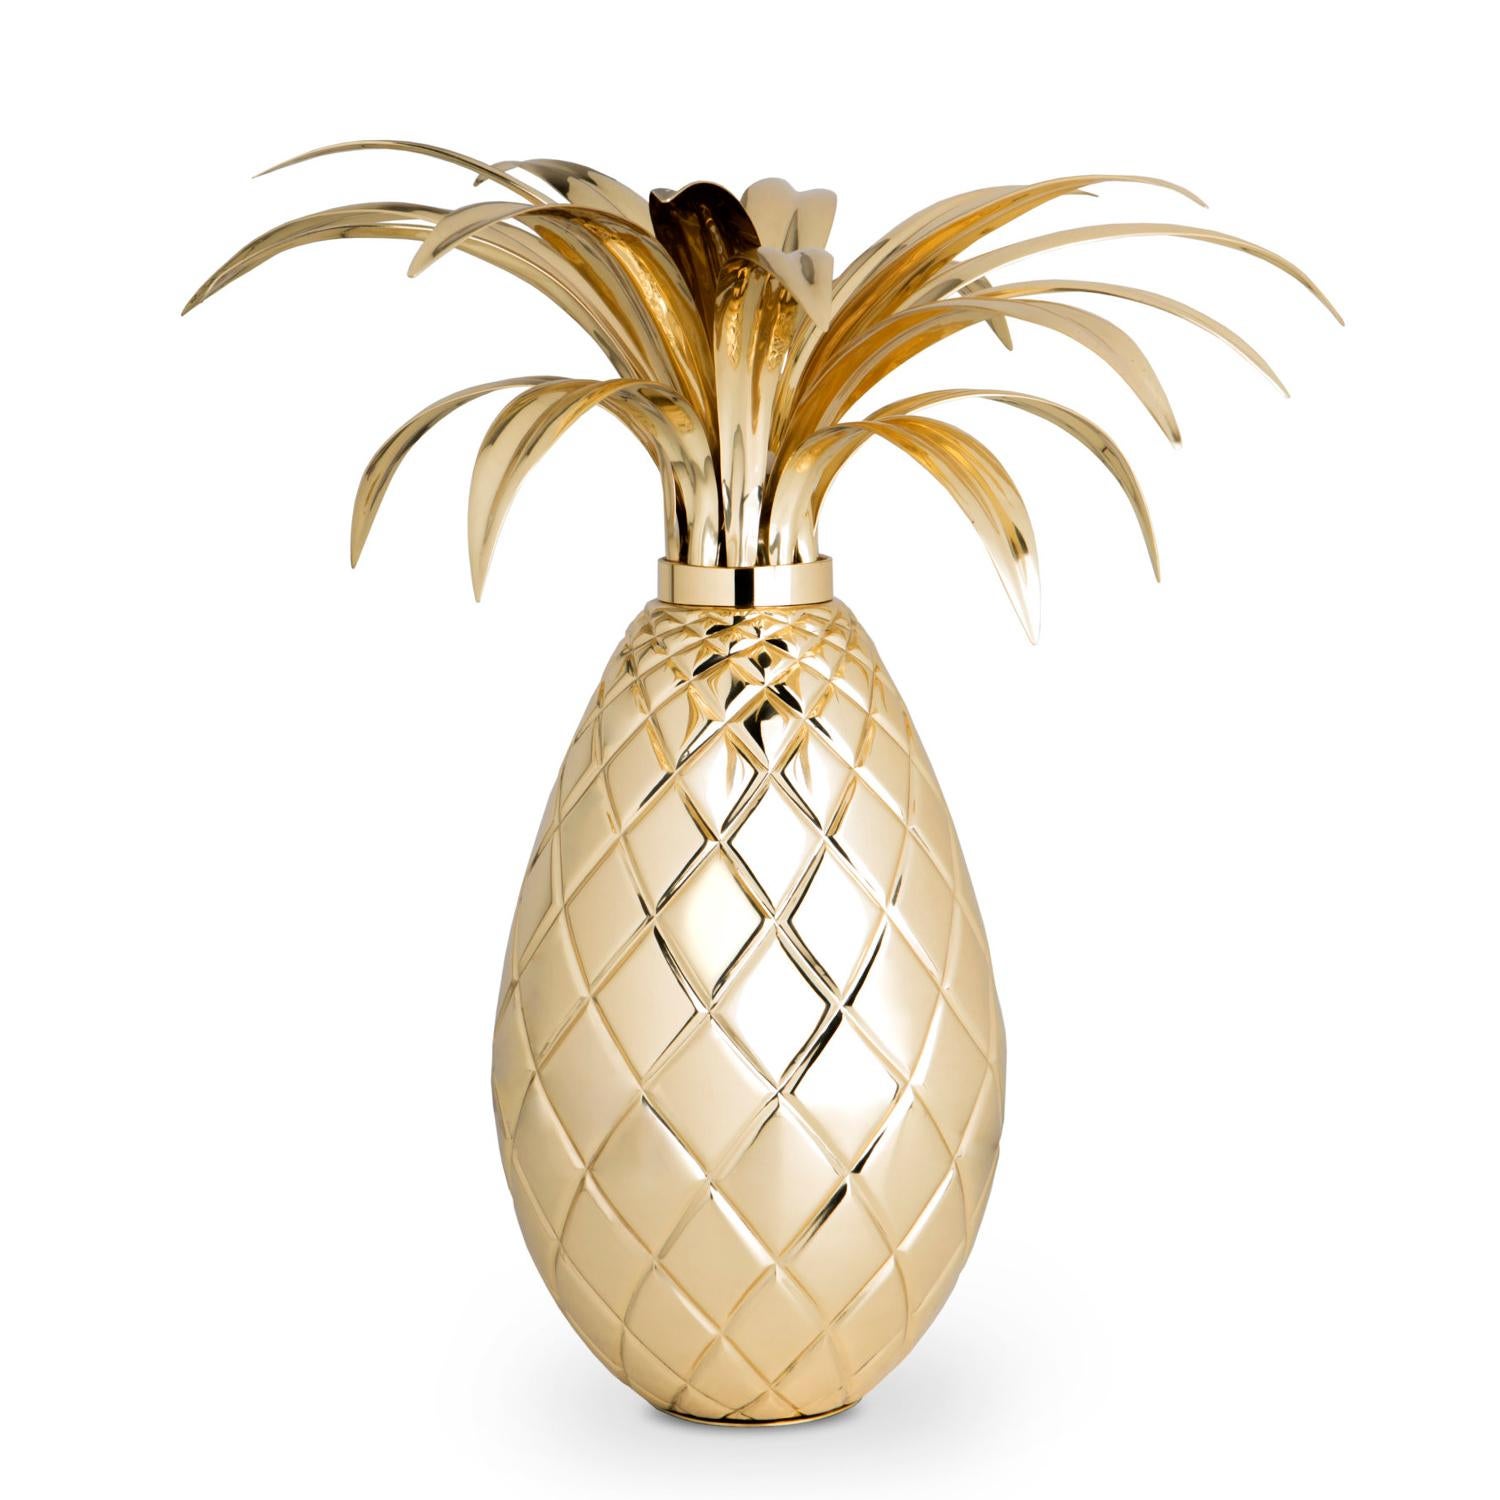 Table lamp ananas with structure and leaves in solid polished brass
in gold plated finish. With 1 bulb, max 40 Watt. Bulb not included.